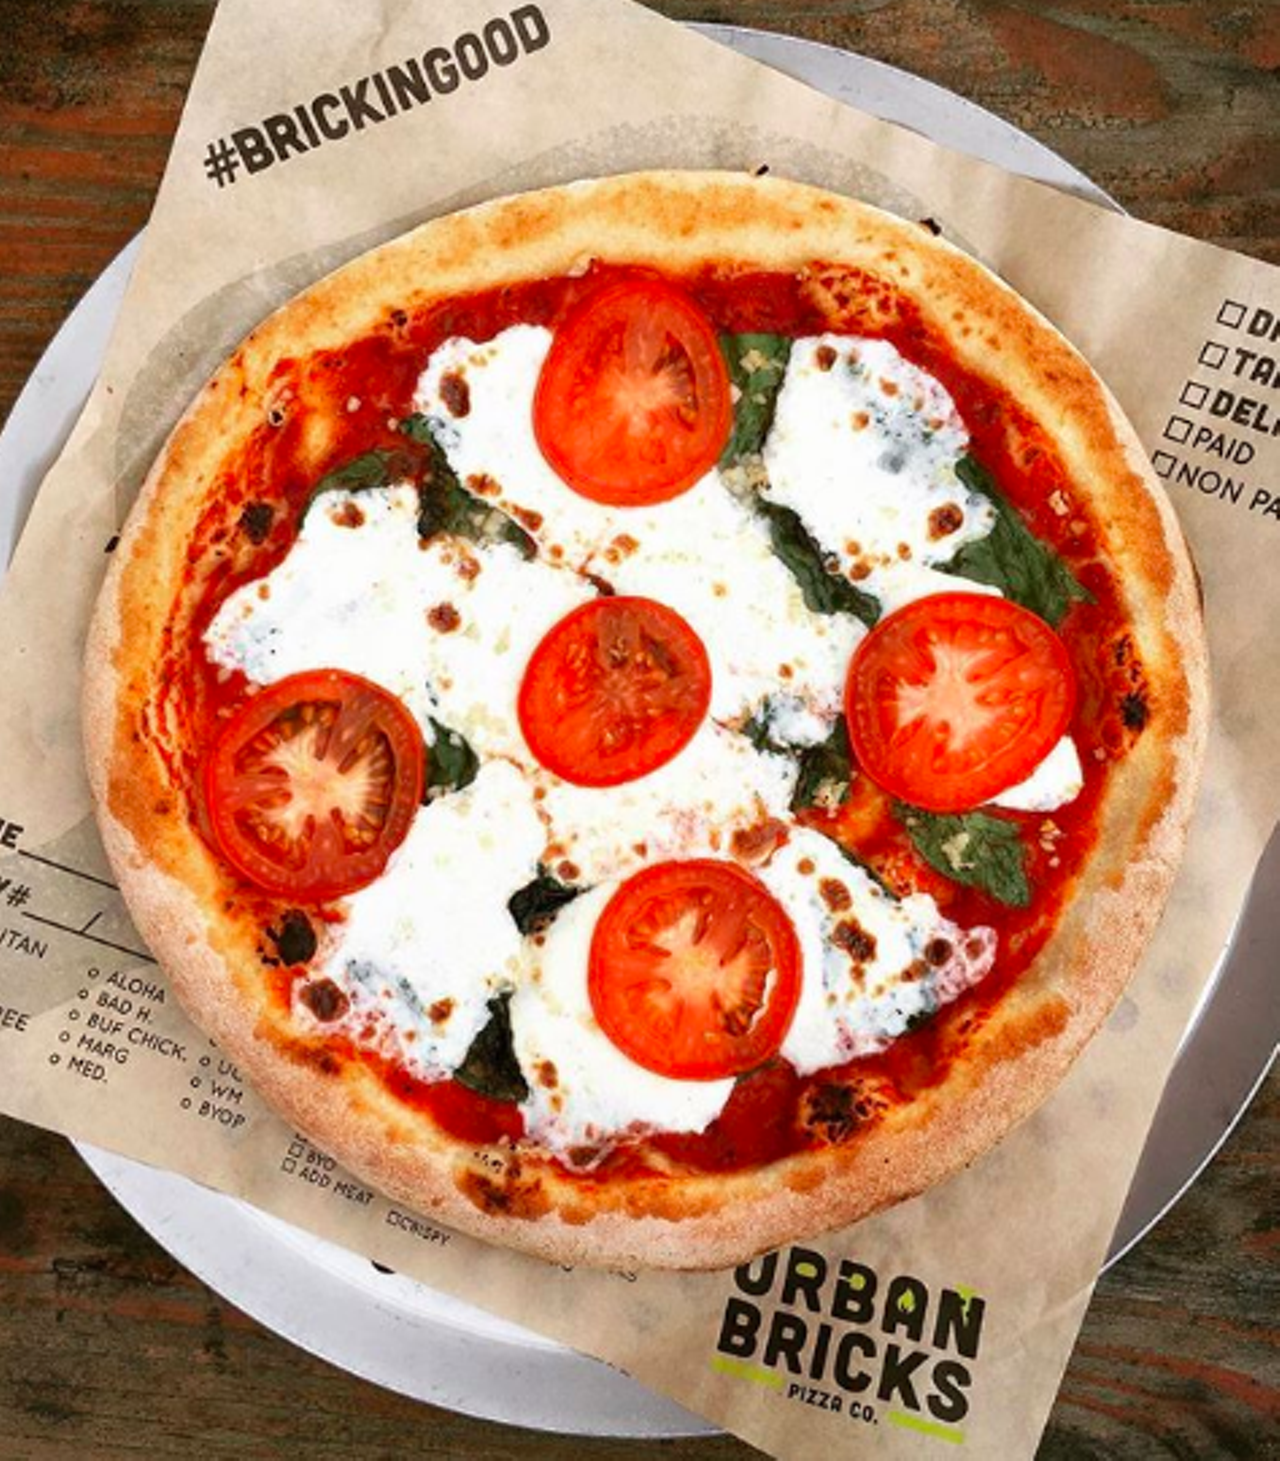 Urban Bricks Pizza Co.
Multiple locations, urbanbricks.com
Not only is Urban Bricks super fast and customizable, it’s also free! On Monday nights, kids 12 and under can get a free half-sheet pizza with the purchase of a regular pizza. You can’t go wrong here!
Photo via Instagram / urbanbrickspizza